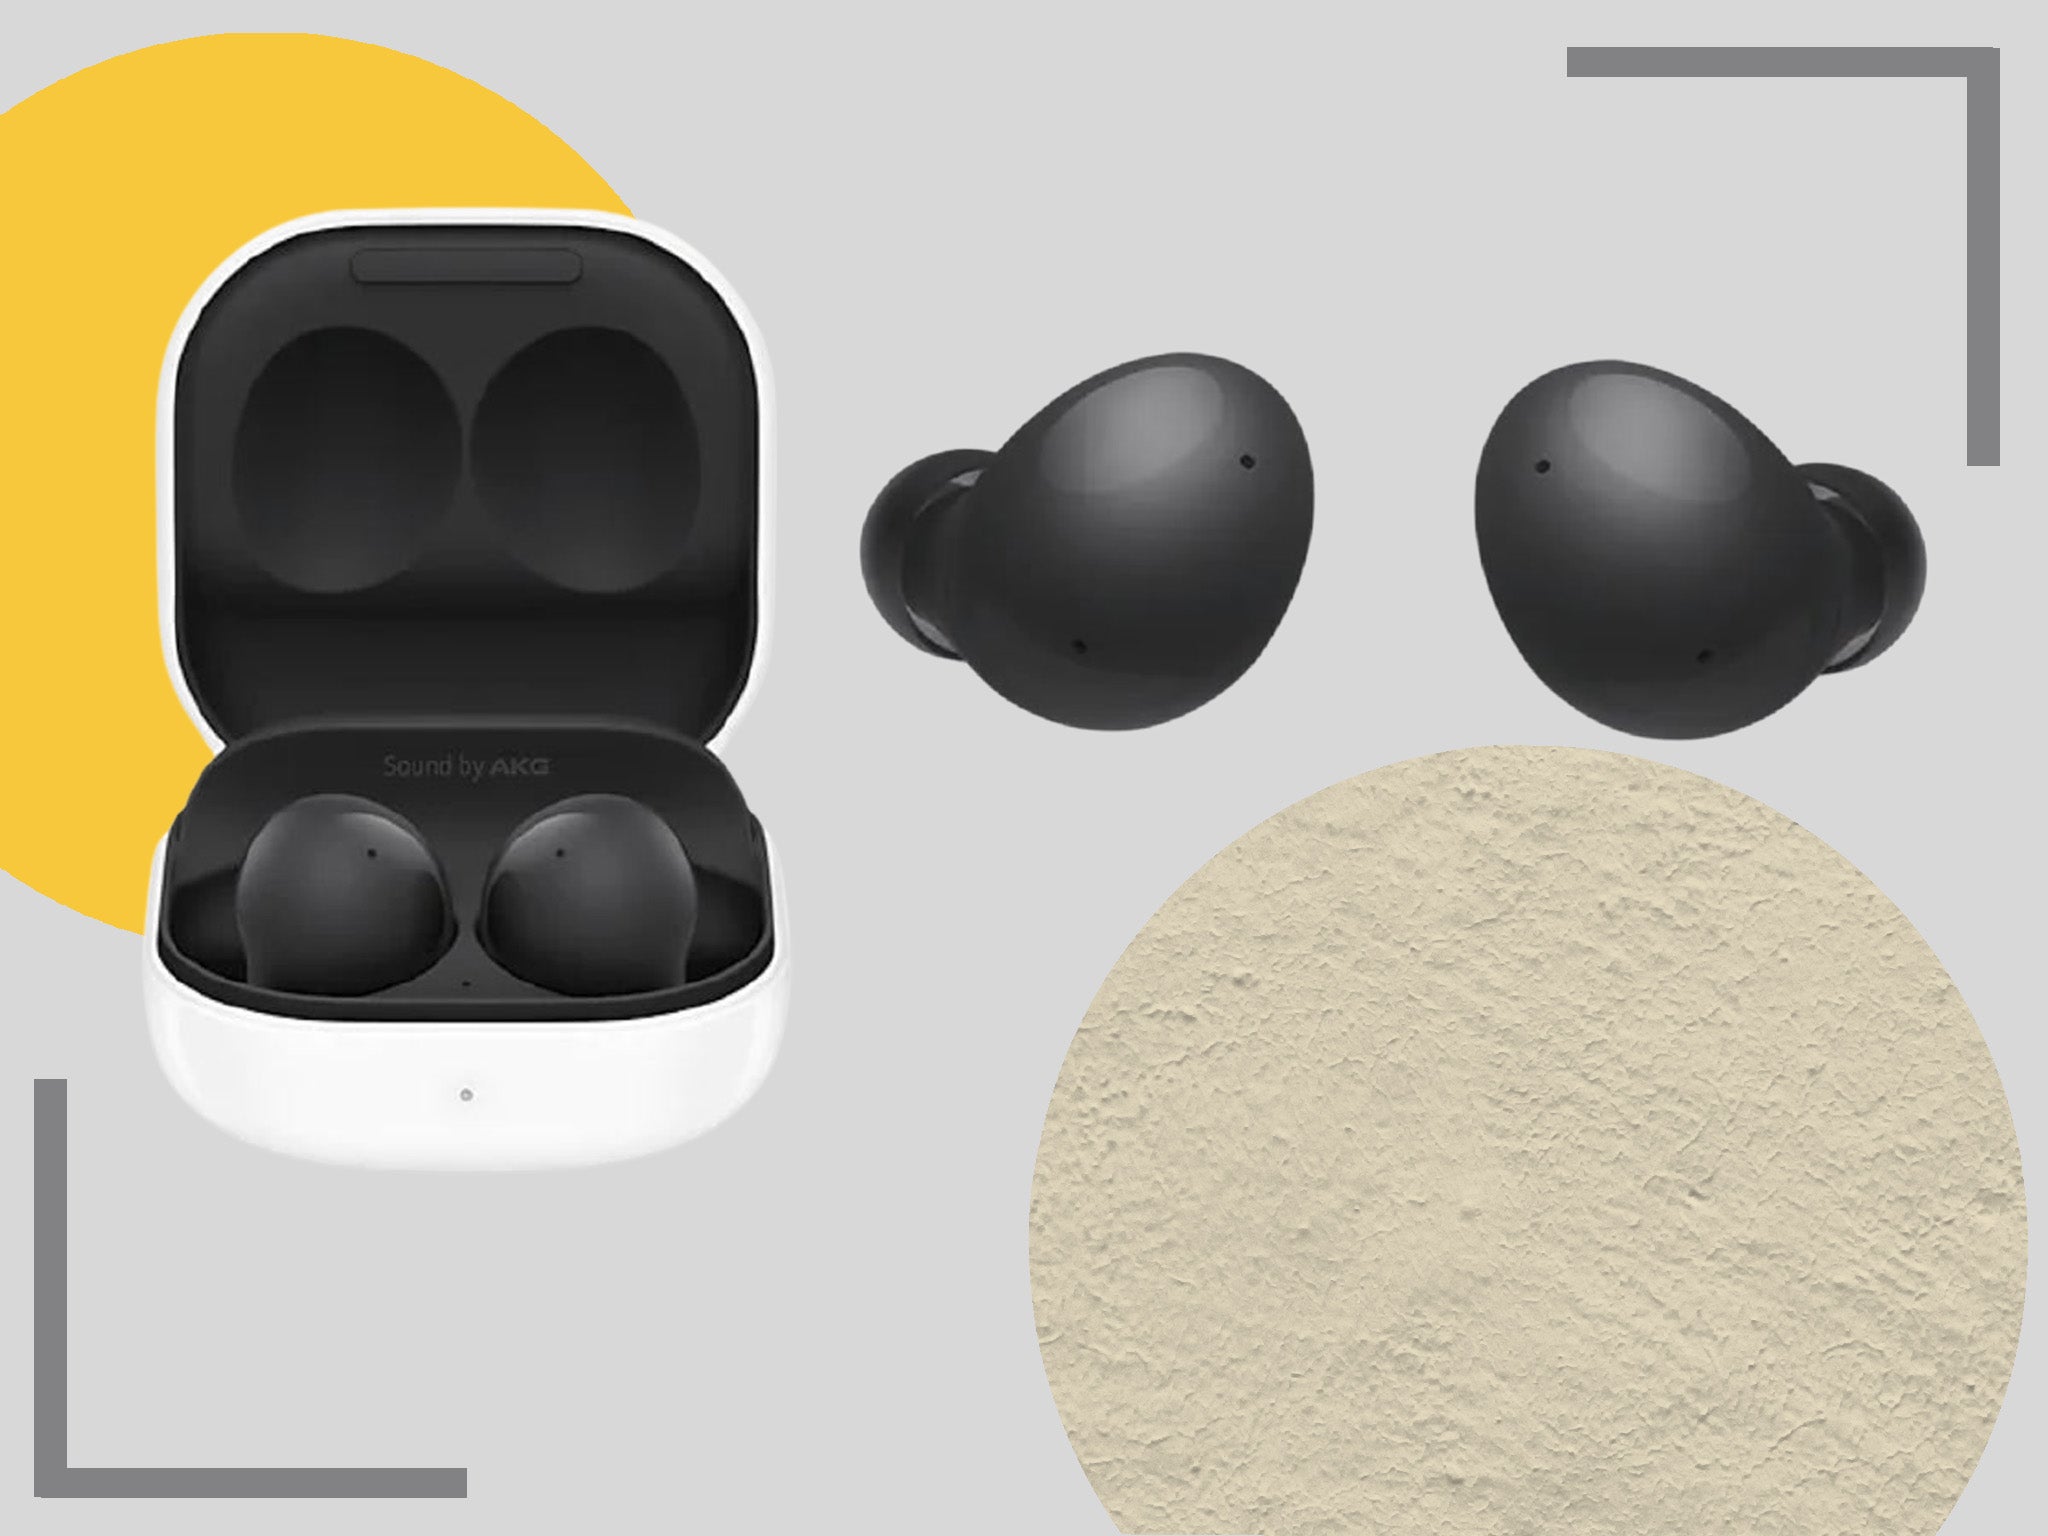 Samsung Galaxy Buds 2 review: Getting out of their own way